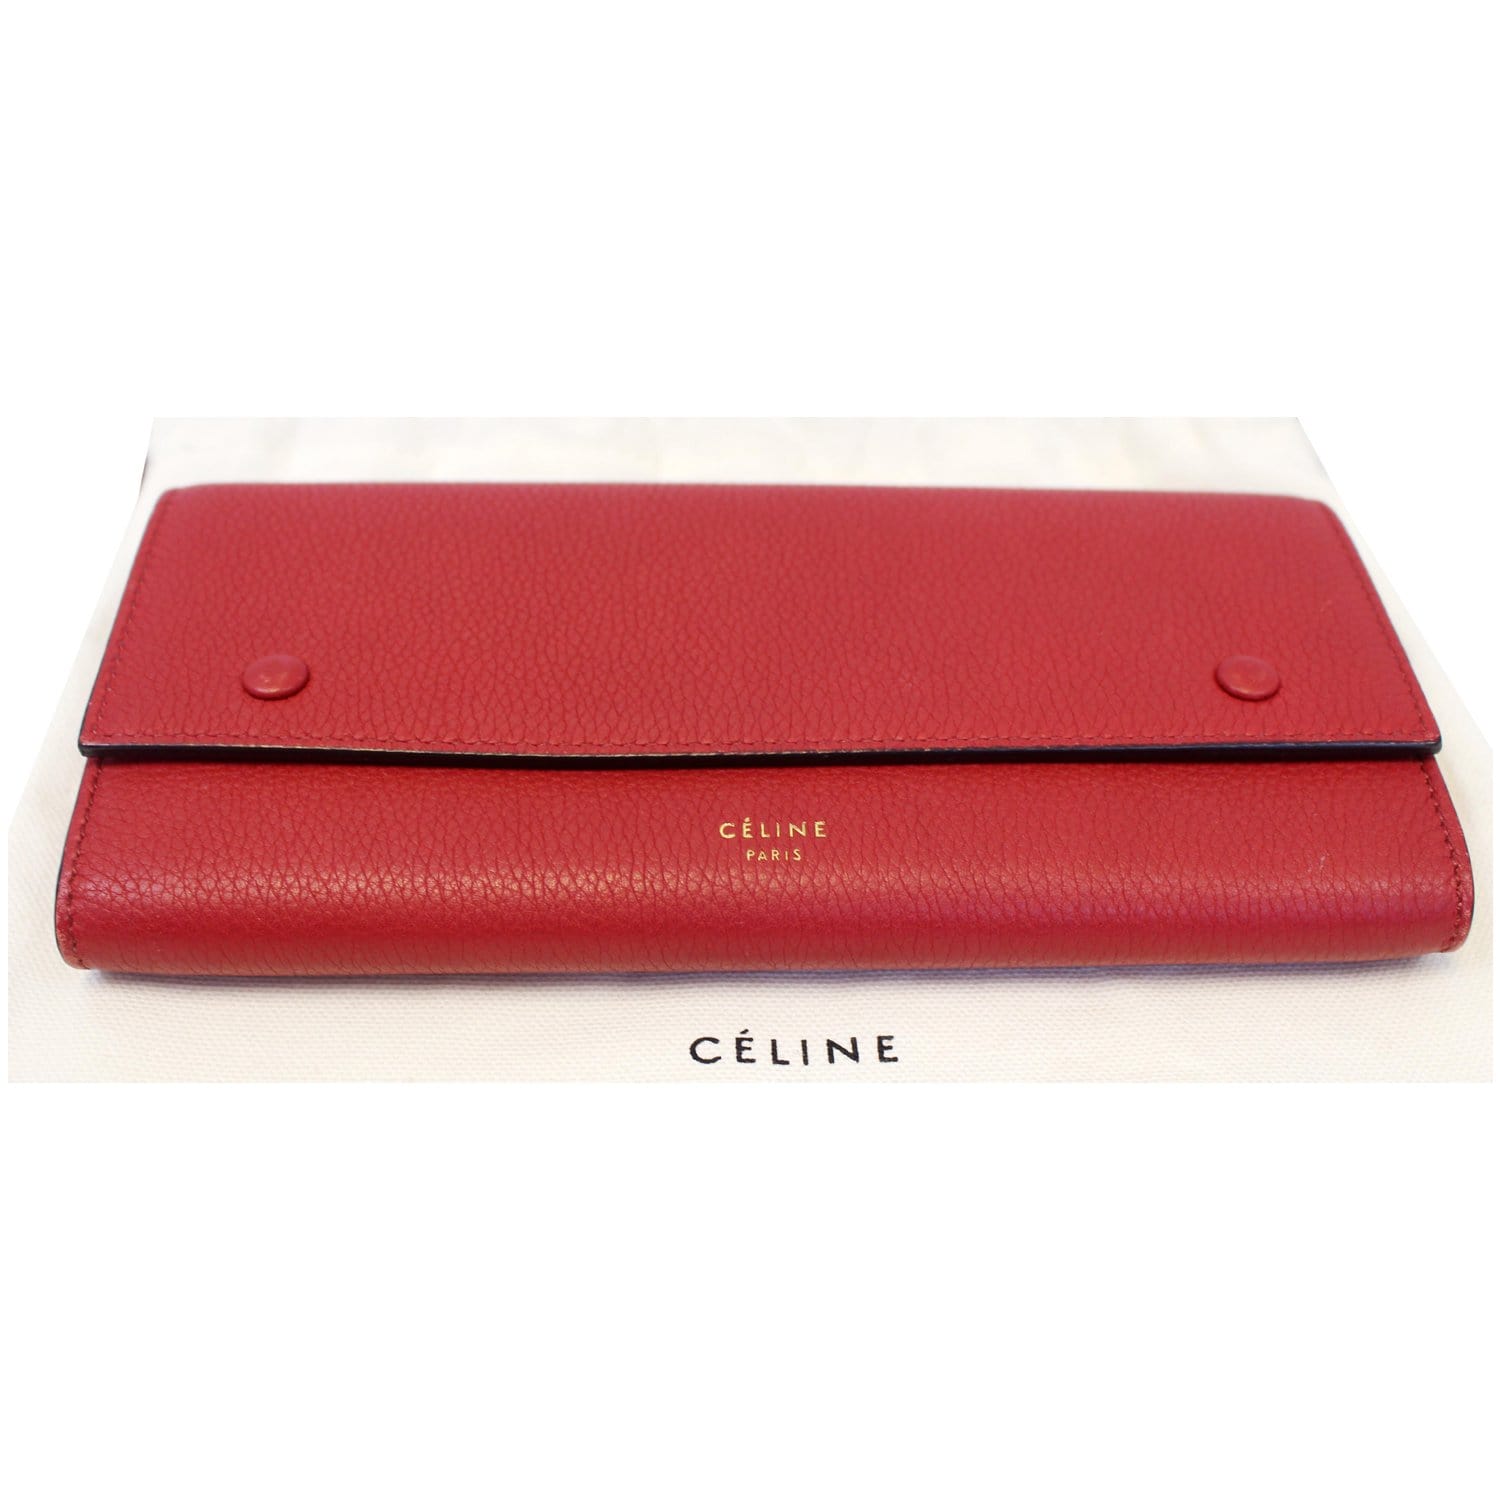 BRAND NEW CELINE SMALL C BURGUNDY & LUBY LEATHER BIFOLD WALLET